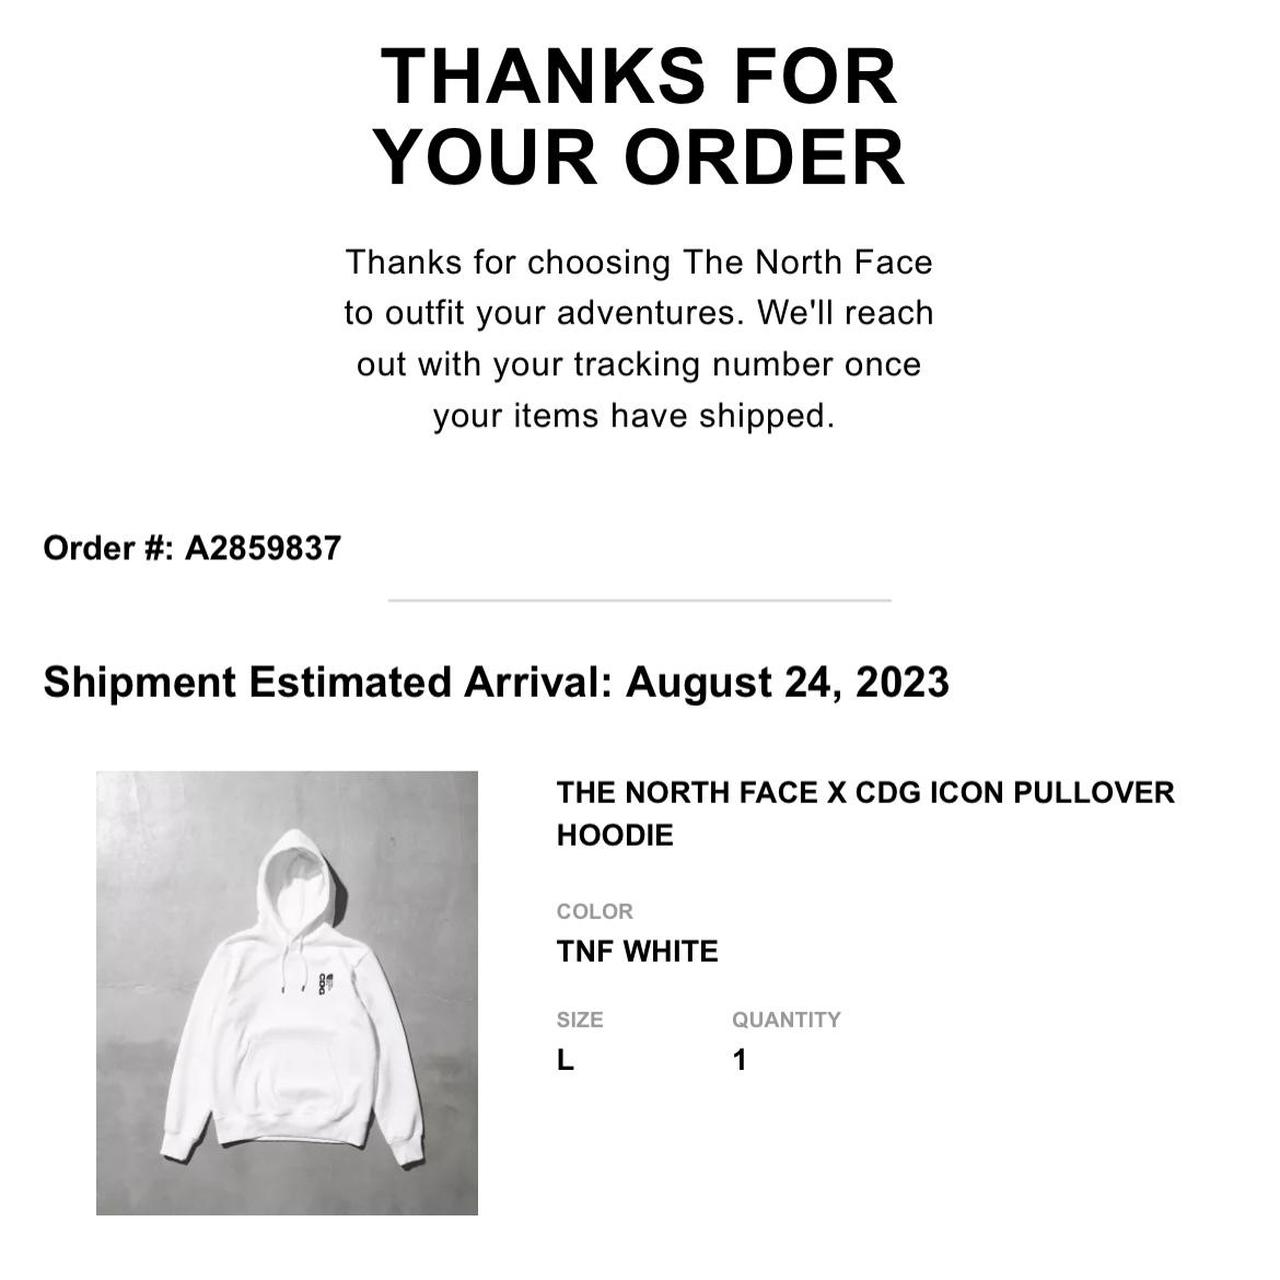 The North Face x CDG Icon PulloverHoodie